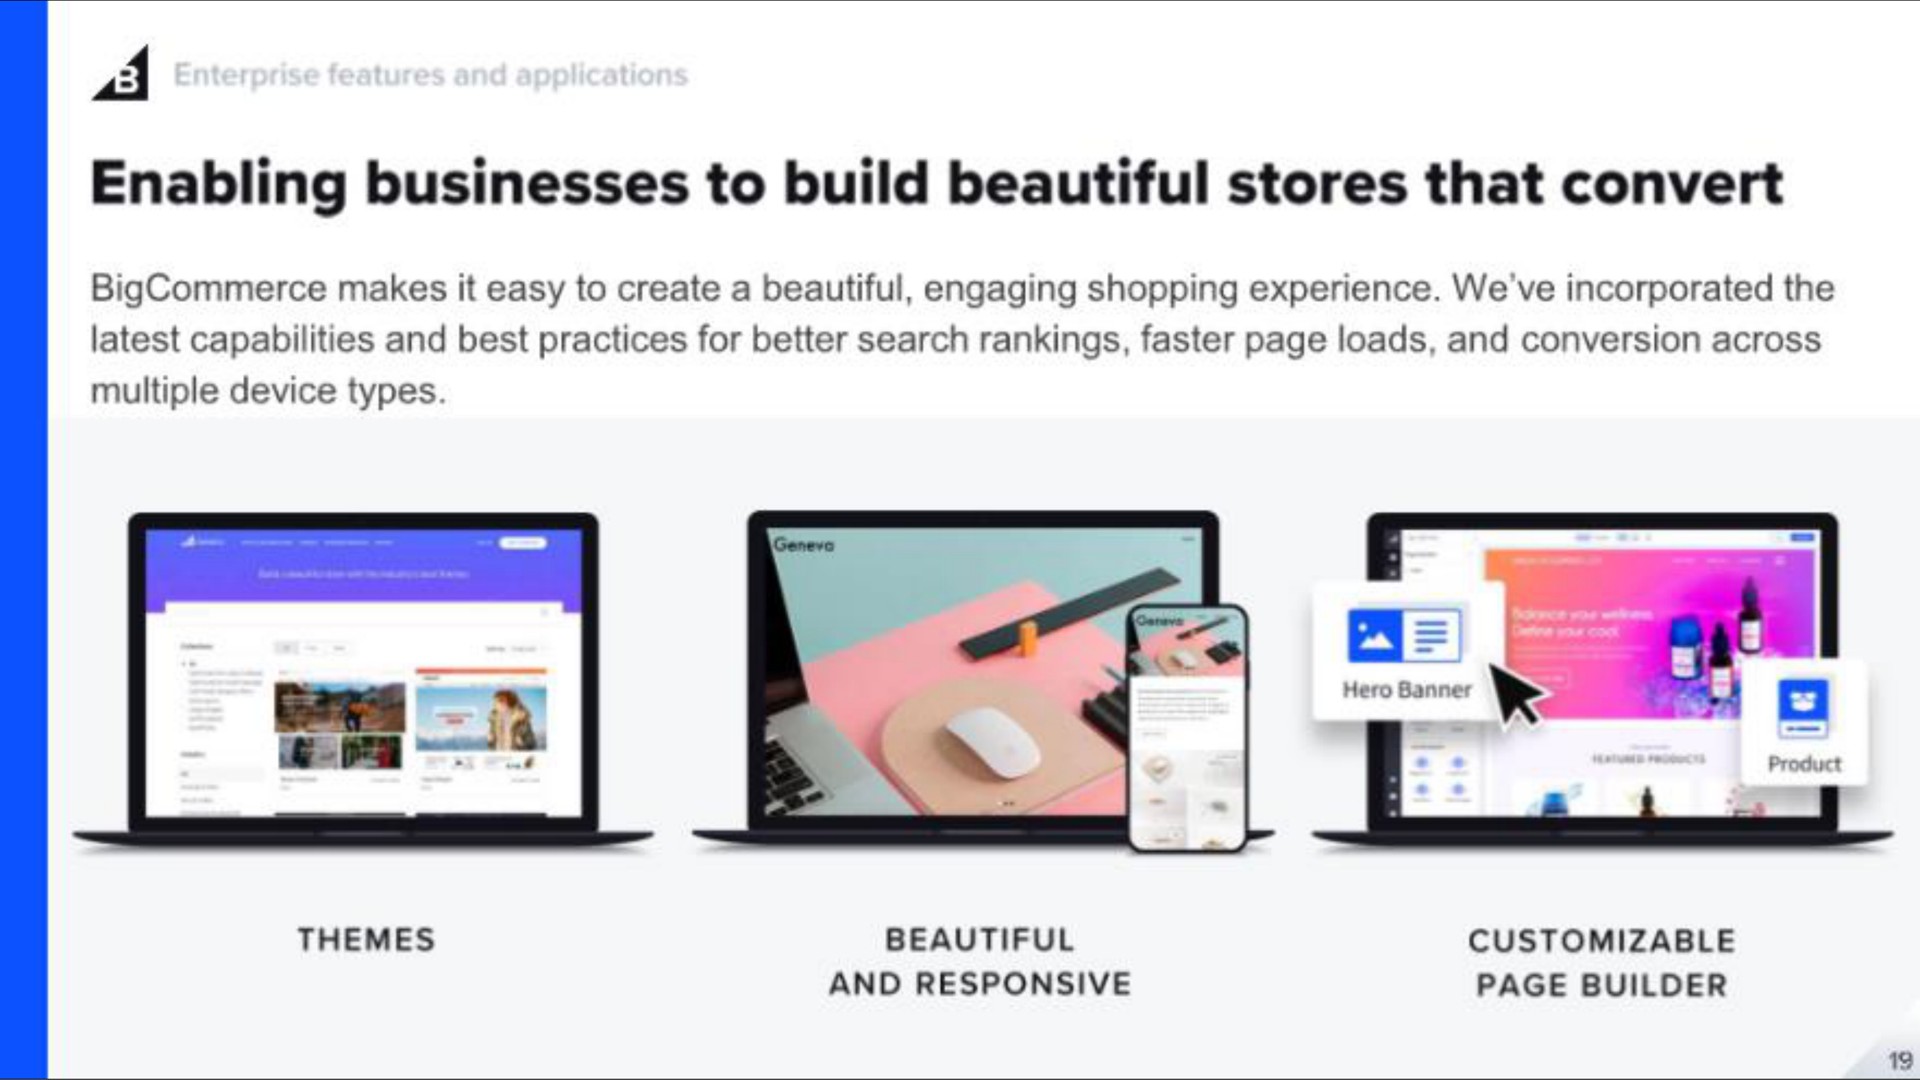 a enabling businesses to build beautiful stores that convert | BigCommerce